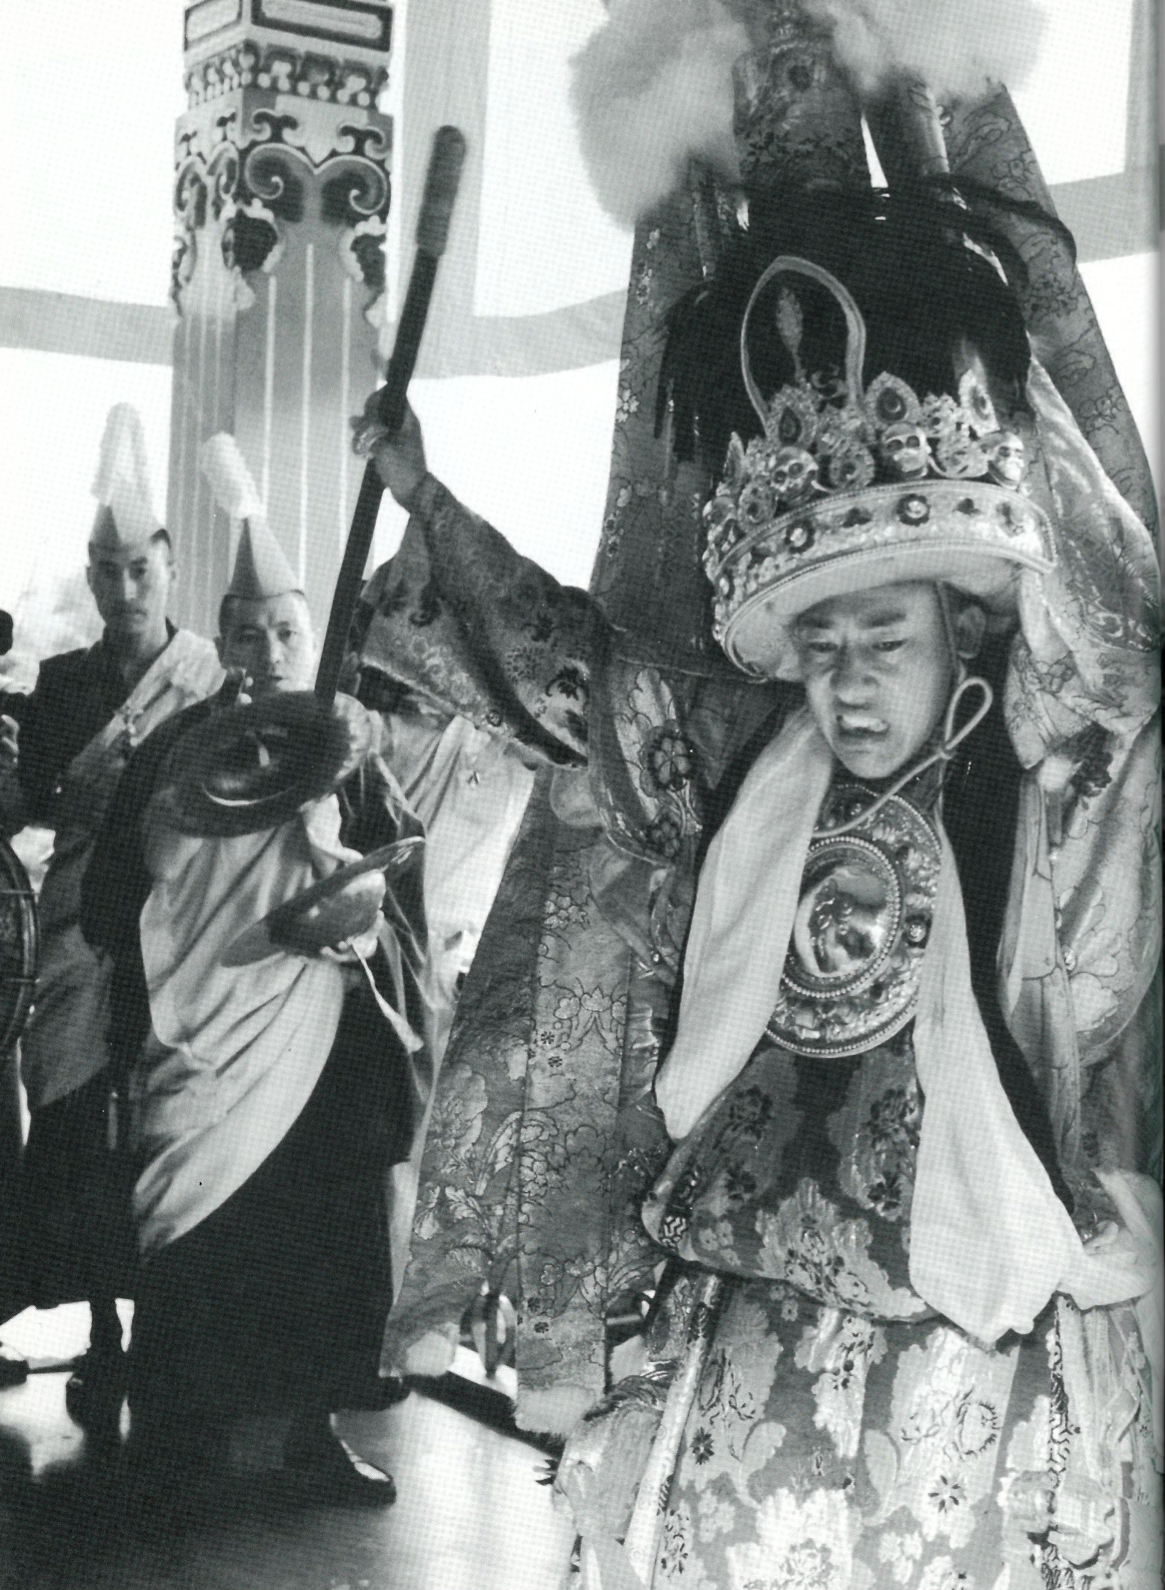 Thupten Ngodrup, the Nechung Oracle, goes into trance. "The Oracle's eyes begin to twitch, his mouth opens, and he starts shaking." Copyright Anna Kelden, Courtesy The Nechung Foundation, New York.